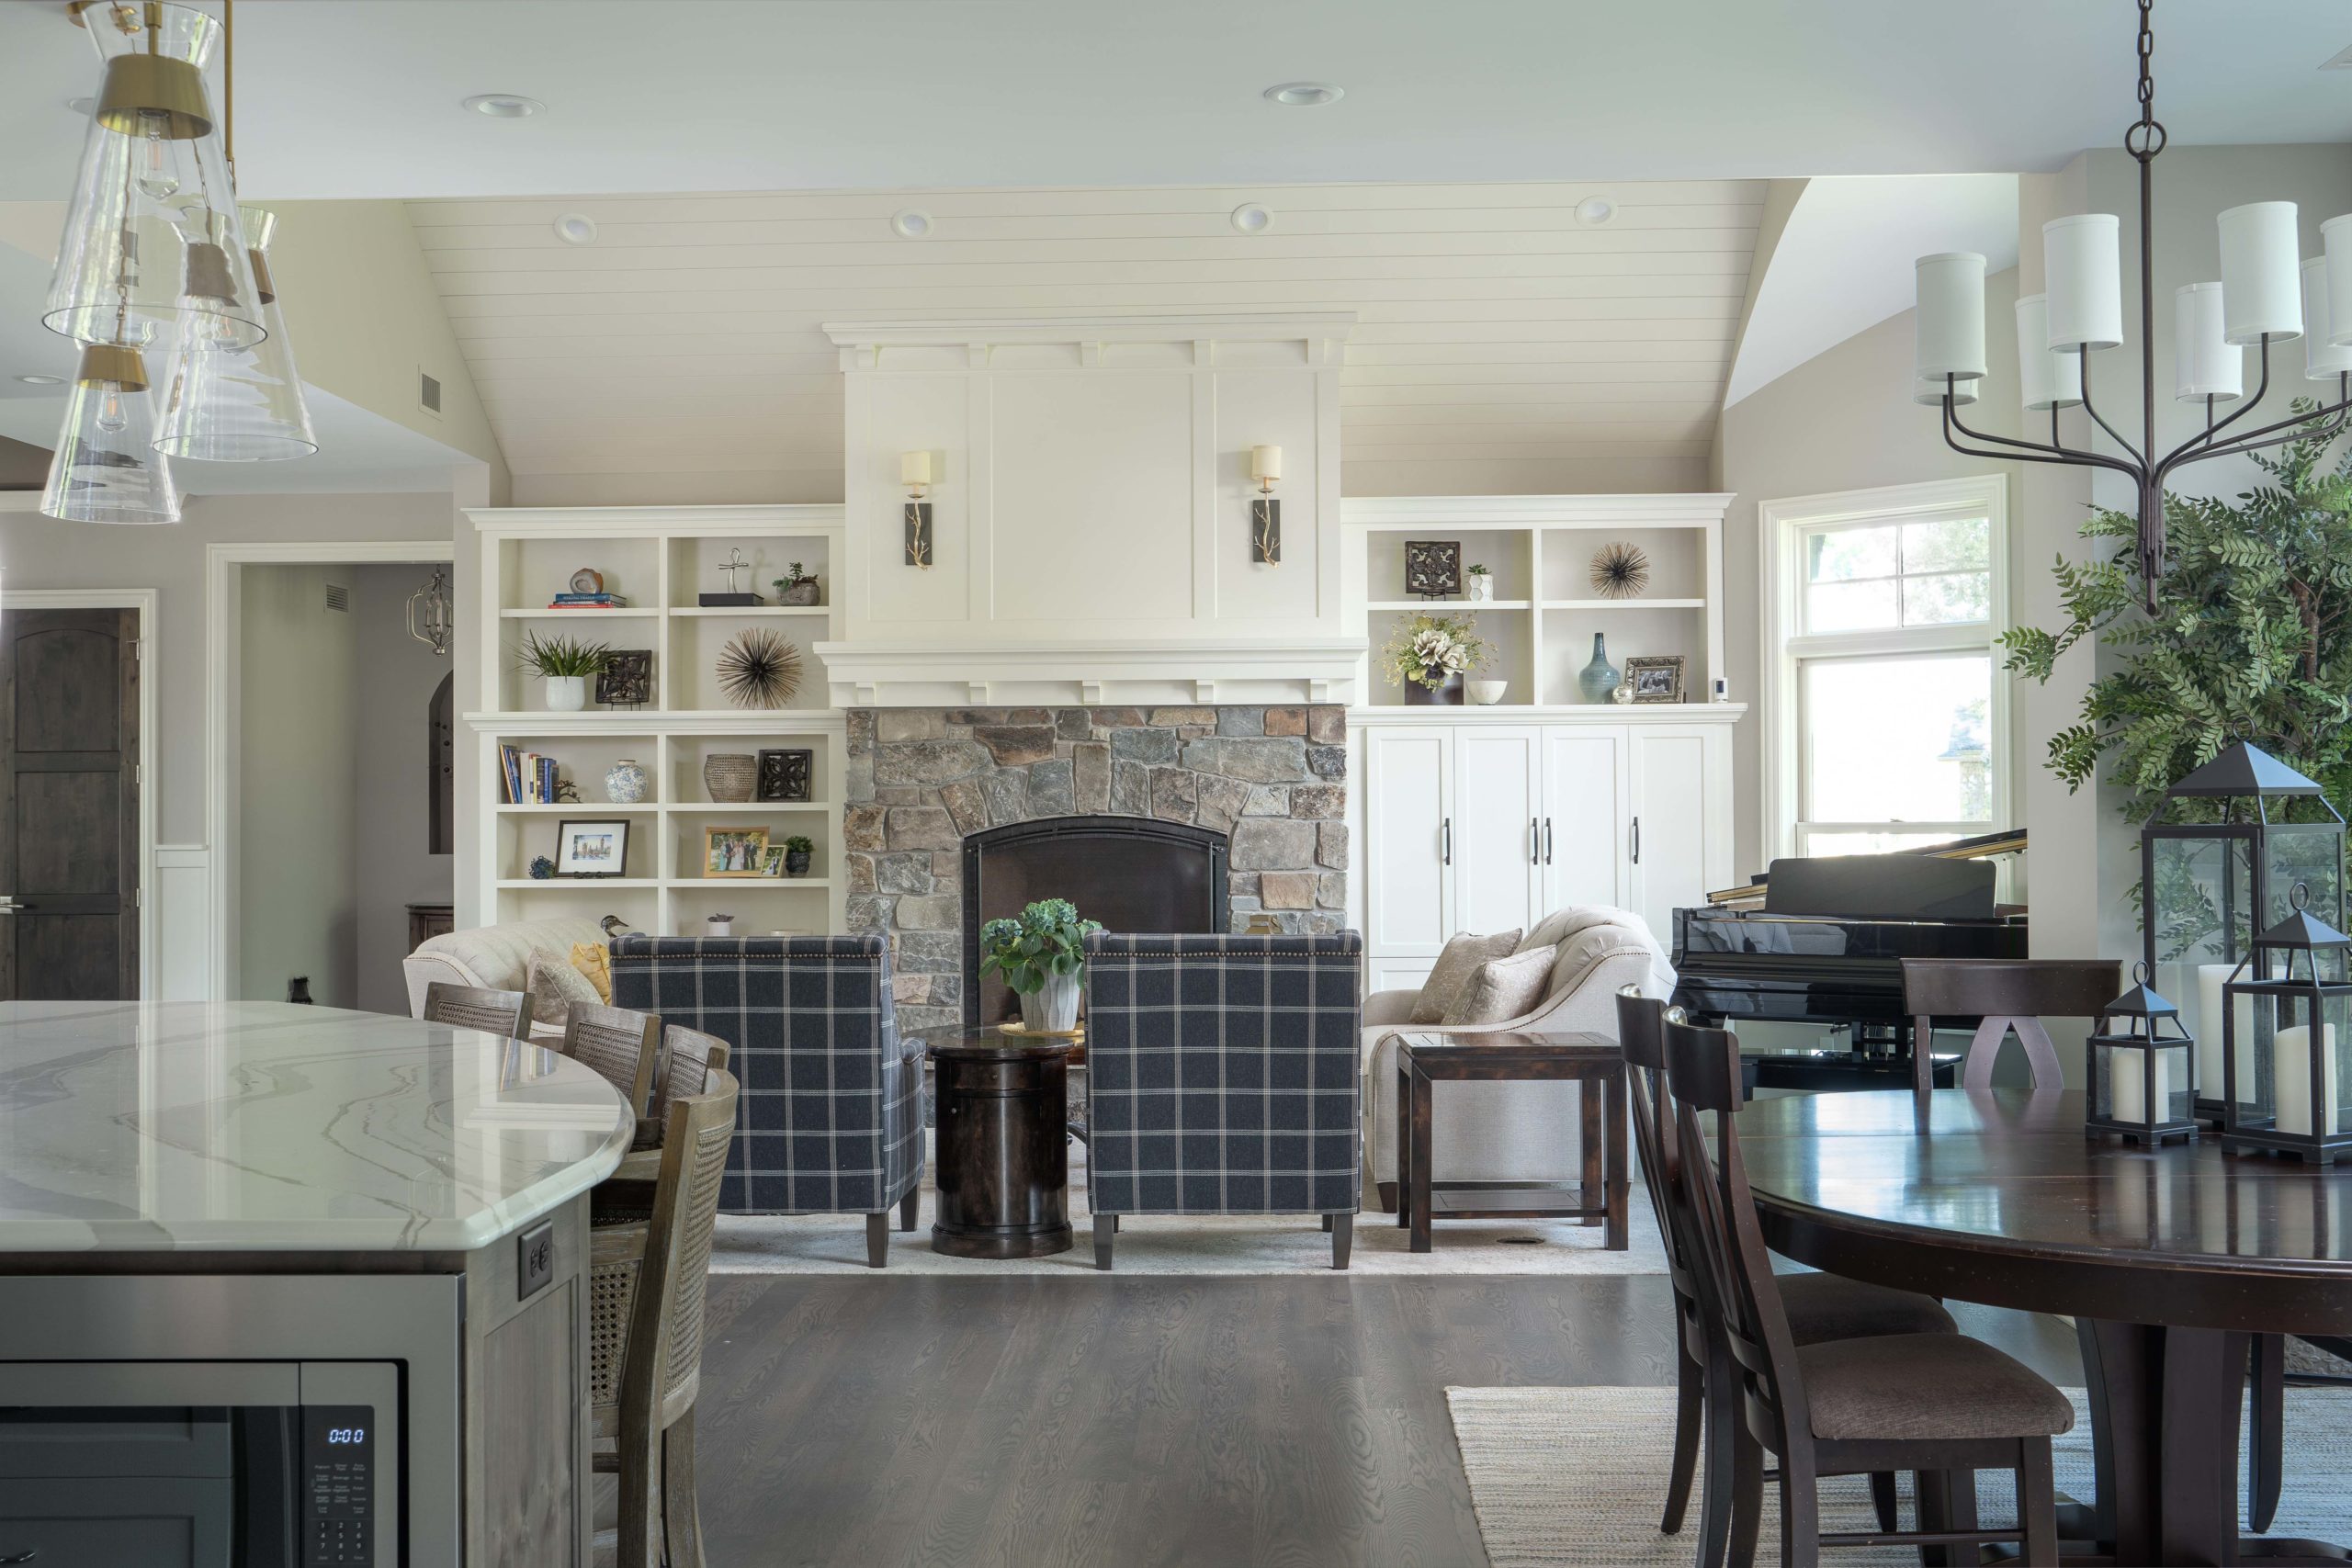 The Lake Escape custom home remodel includes a kitchen with a dining table and chairs.